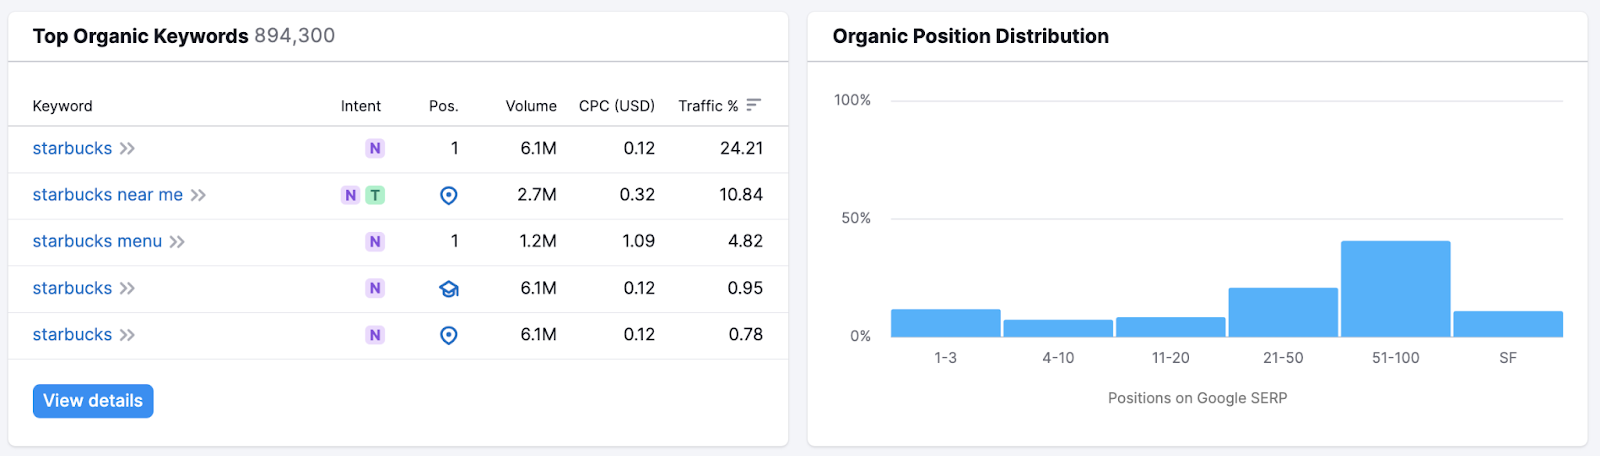 "Top Organic Keywords" and "Organic Position Distribution" sections in Domain Overview